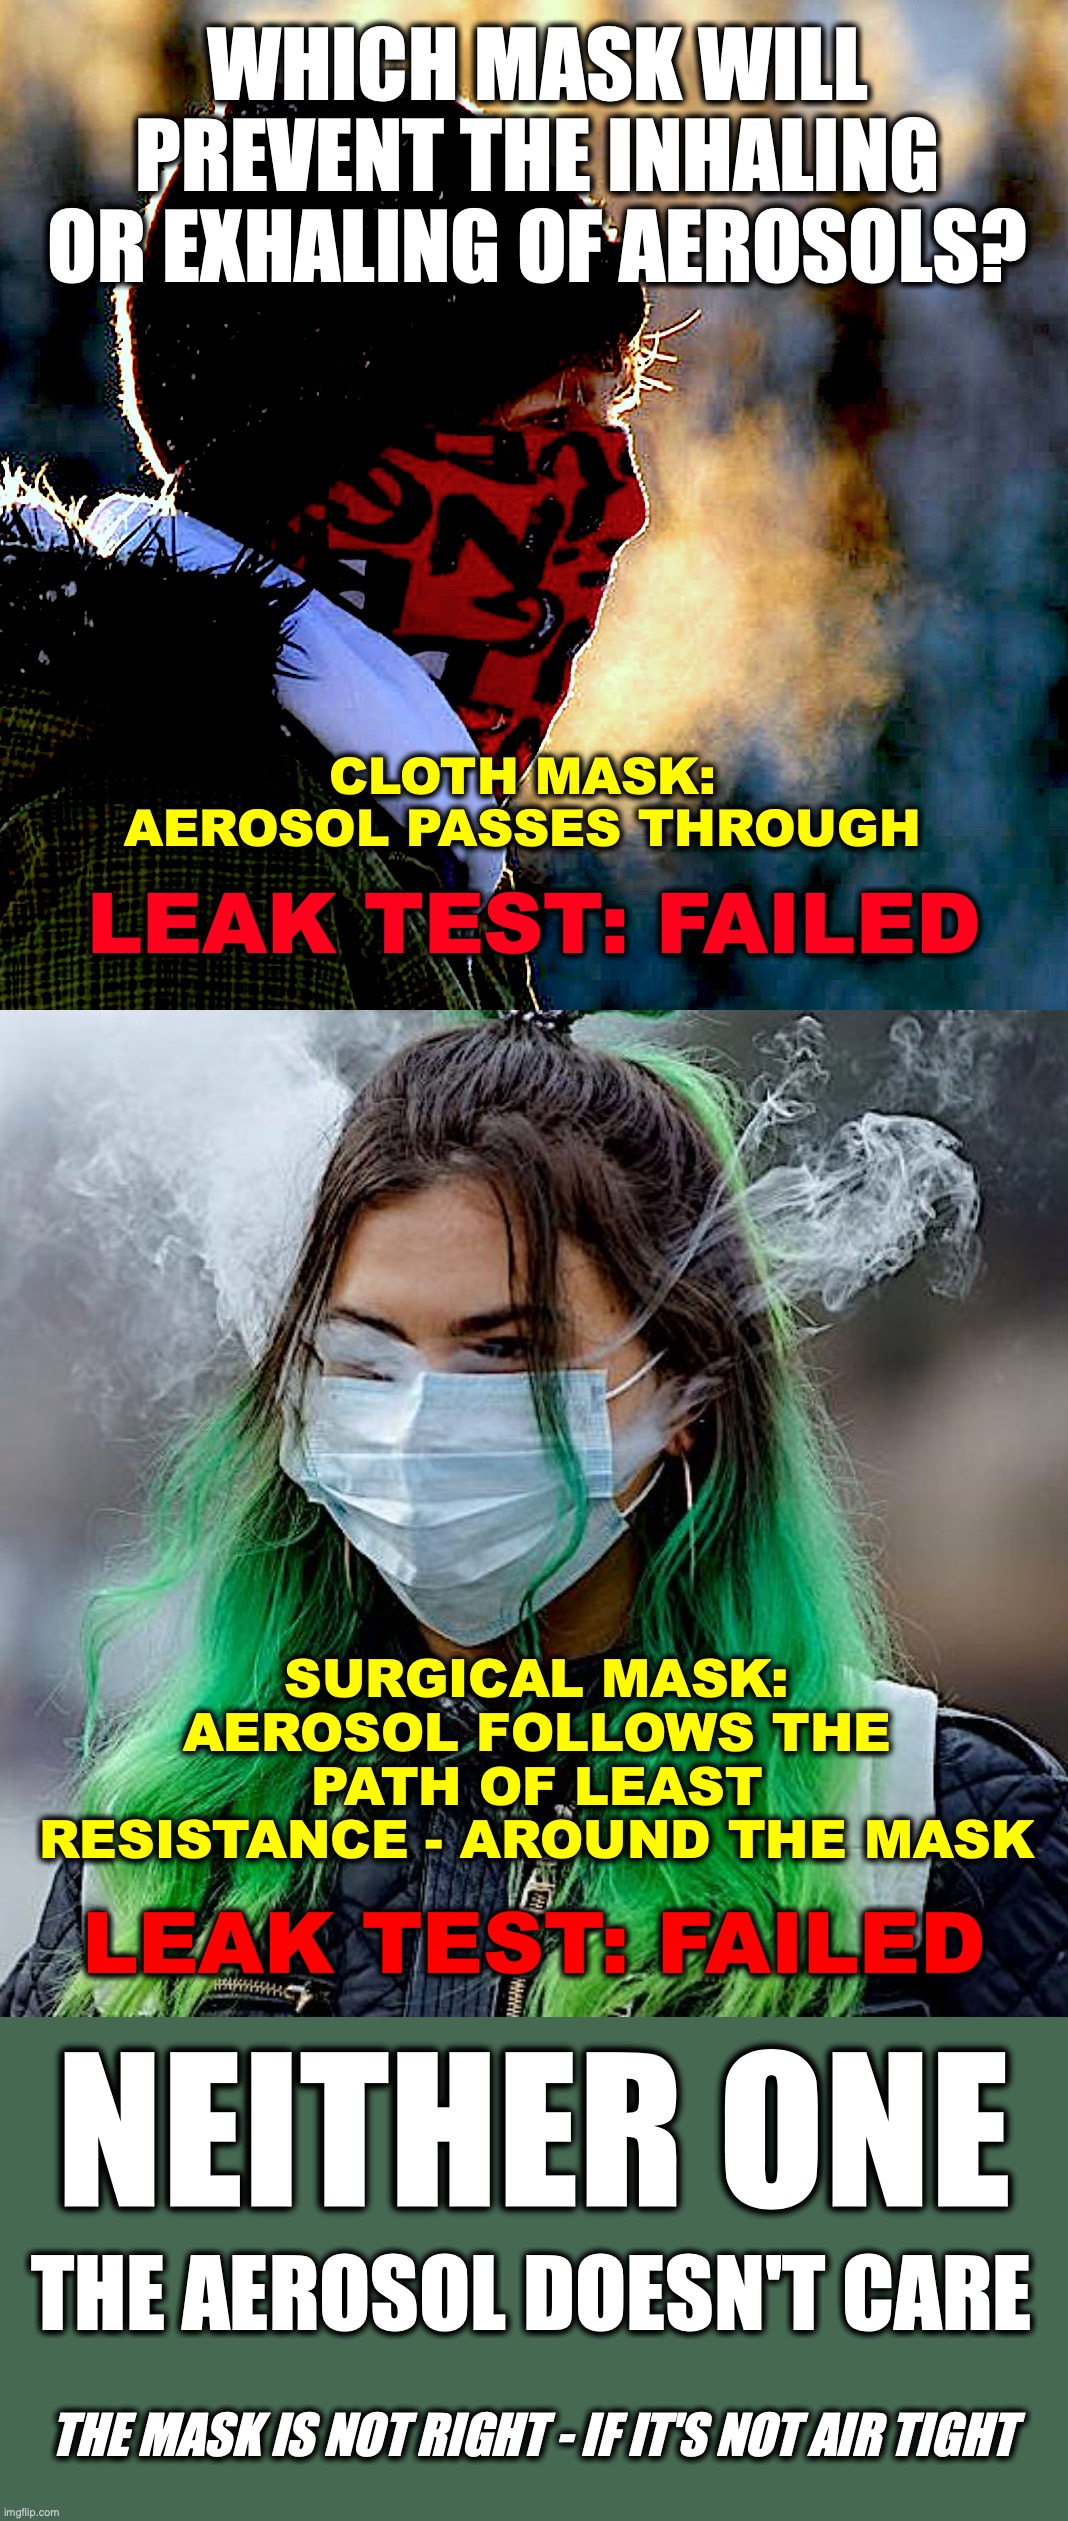 THE MASK IS NOT RIGHT - IF IT'S NOT AIR TIGHT | WHICH MASK WILL PREVENT THE INHALING OR EXHALING OF AEROSOLS? CLOTH MASK: AEROSOL PASSES THROUGH; LEAK TEST: FAILED; SURGICAL MASK: AEROSOL FOLLOWS THE PATH OF LEAST RESISTANCE - AROUND THE MASK; LEAK TEST: FAILED; NEITHER ONE; THE AEROSOL DOESN'T CARE; THE MASK IS NOT RIGHT - IF IT'S NOT AIR TIGHT | image tagged in covid-19,coronavirus,coronavirus meme,covidiots | made w/ Imgflip meme maker